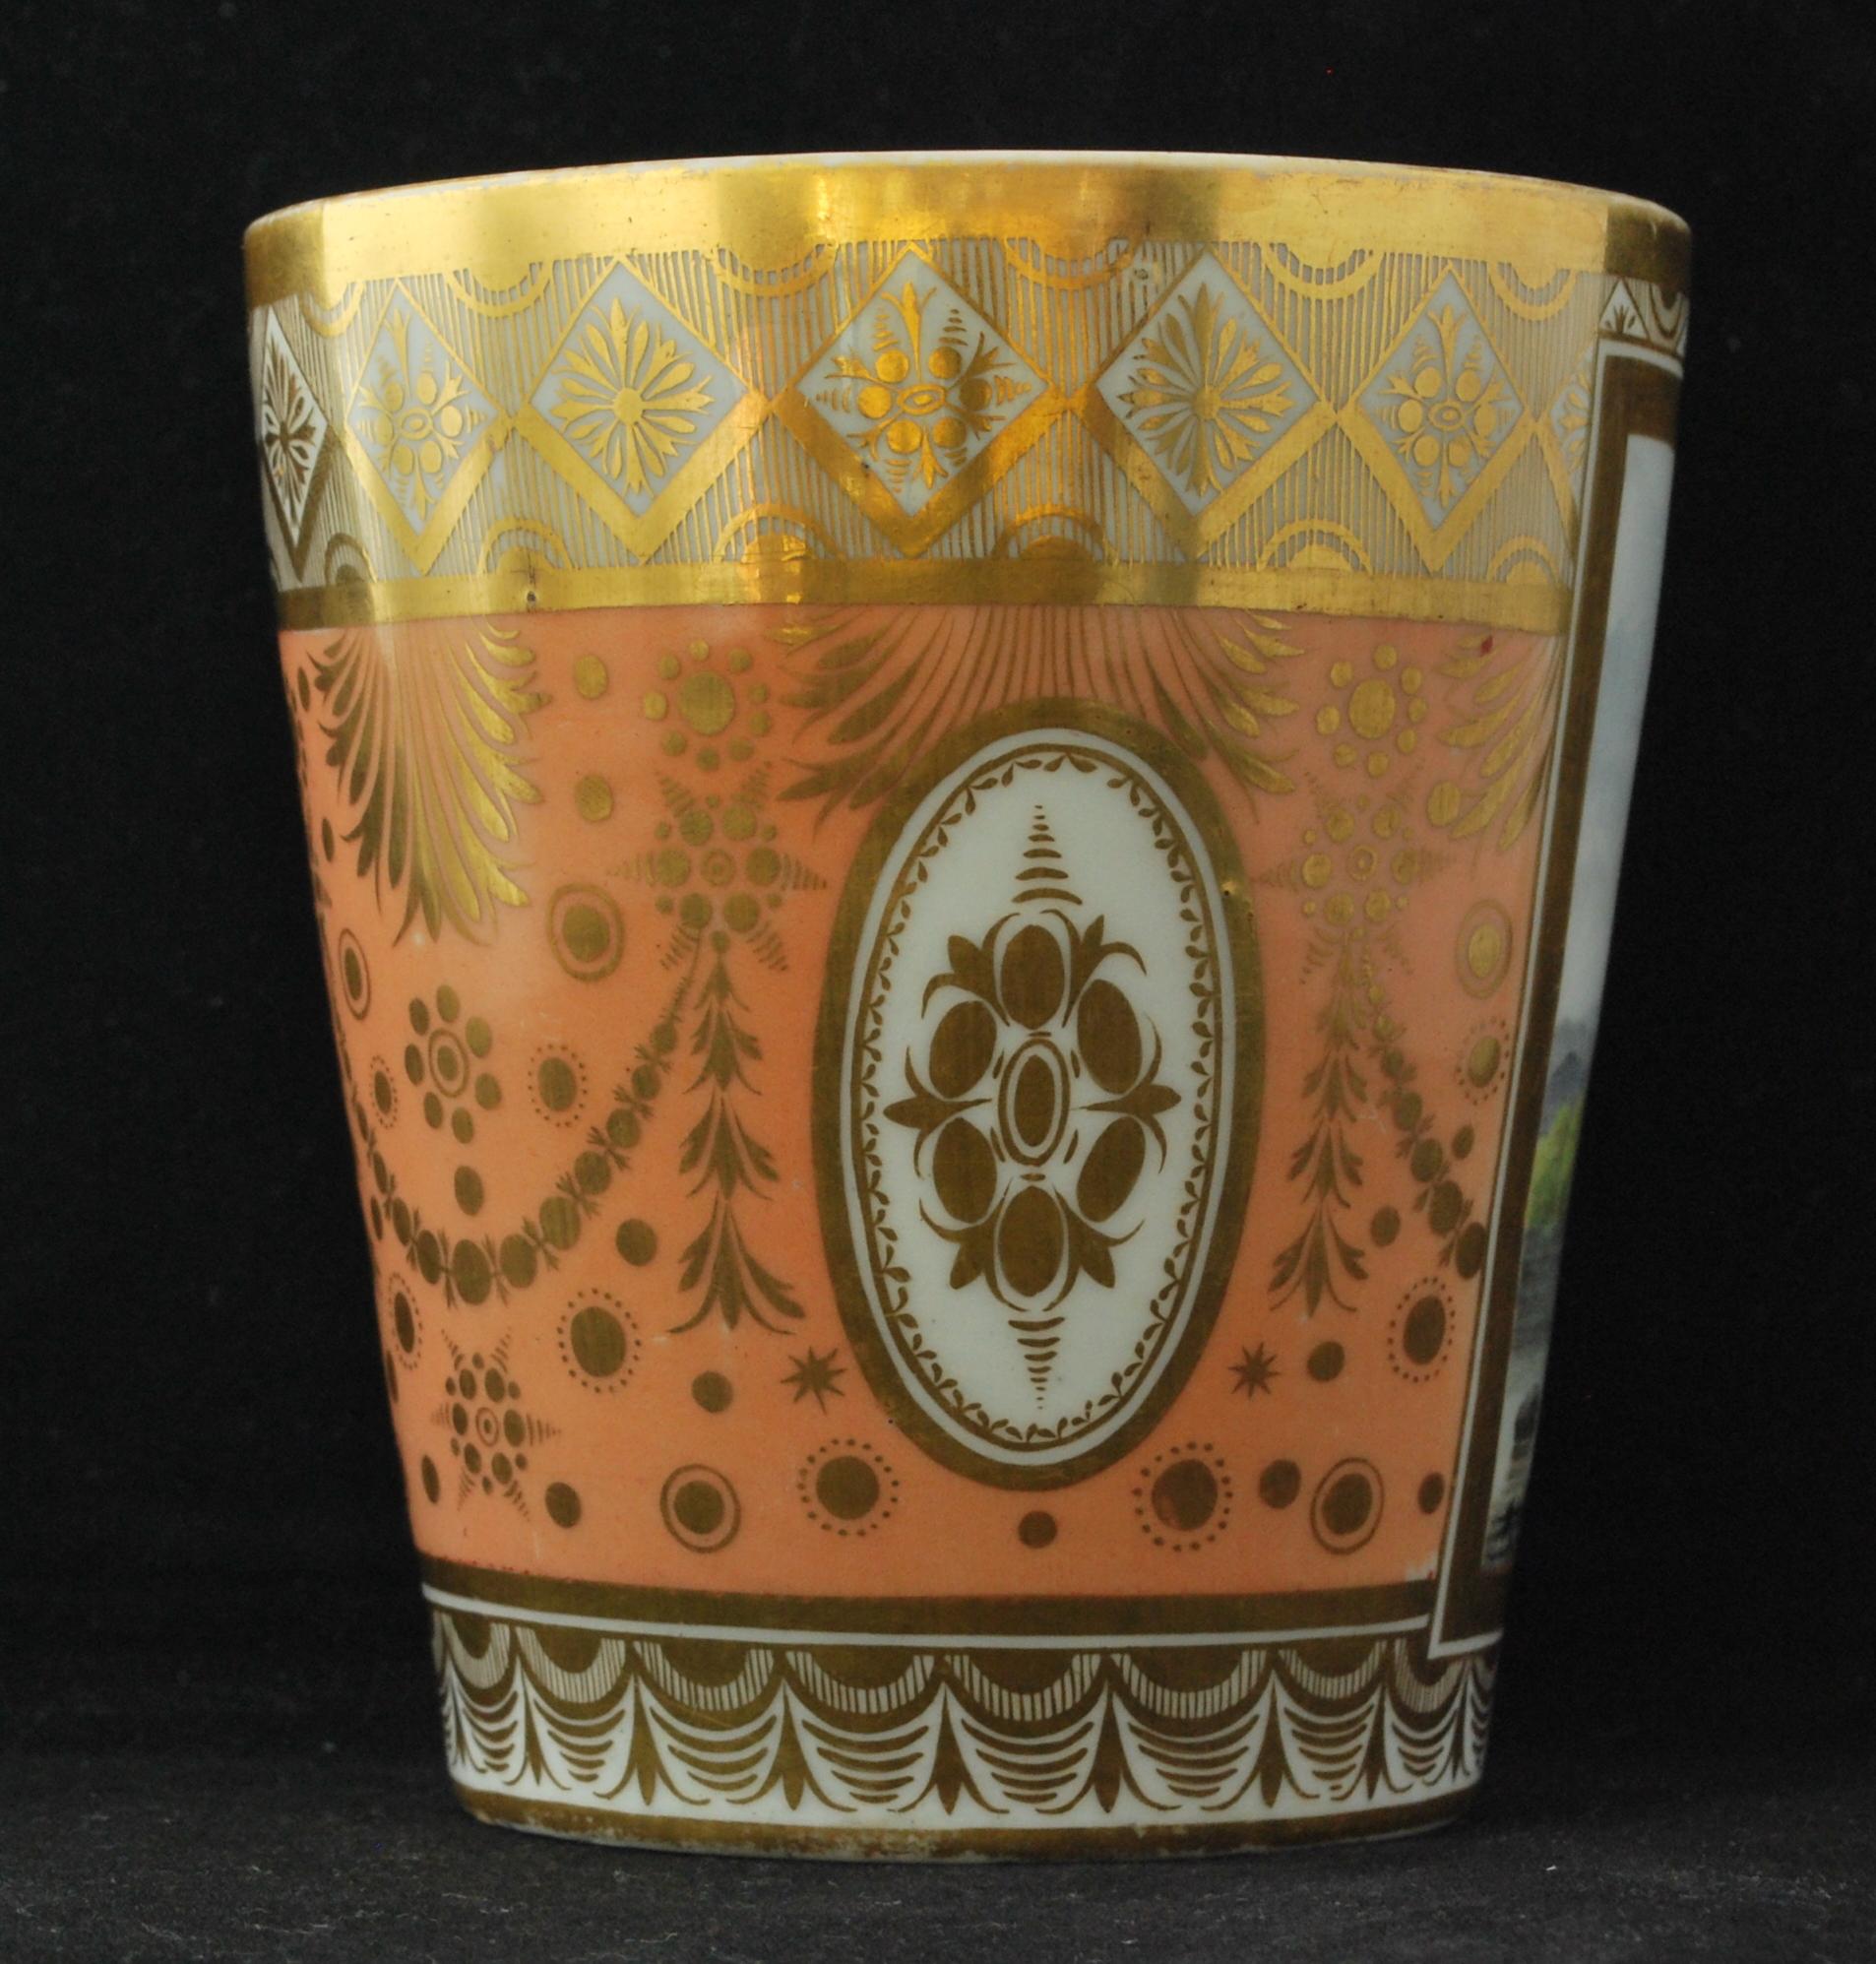 A large beaker with gilt decoration on a salmon-pink ground, revealing a reserve painted with a polychrome landscape.

Provenance: Stockspring Antiques London.